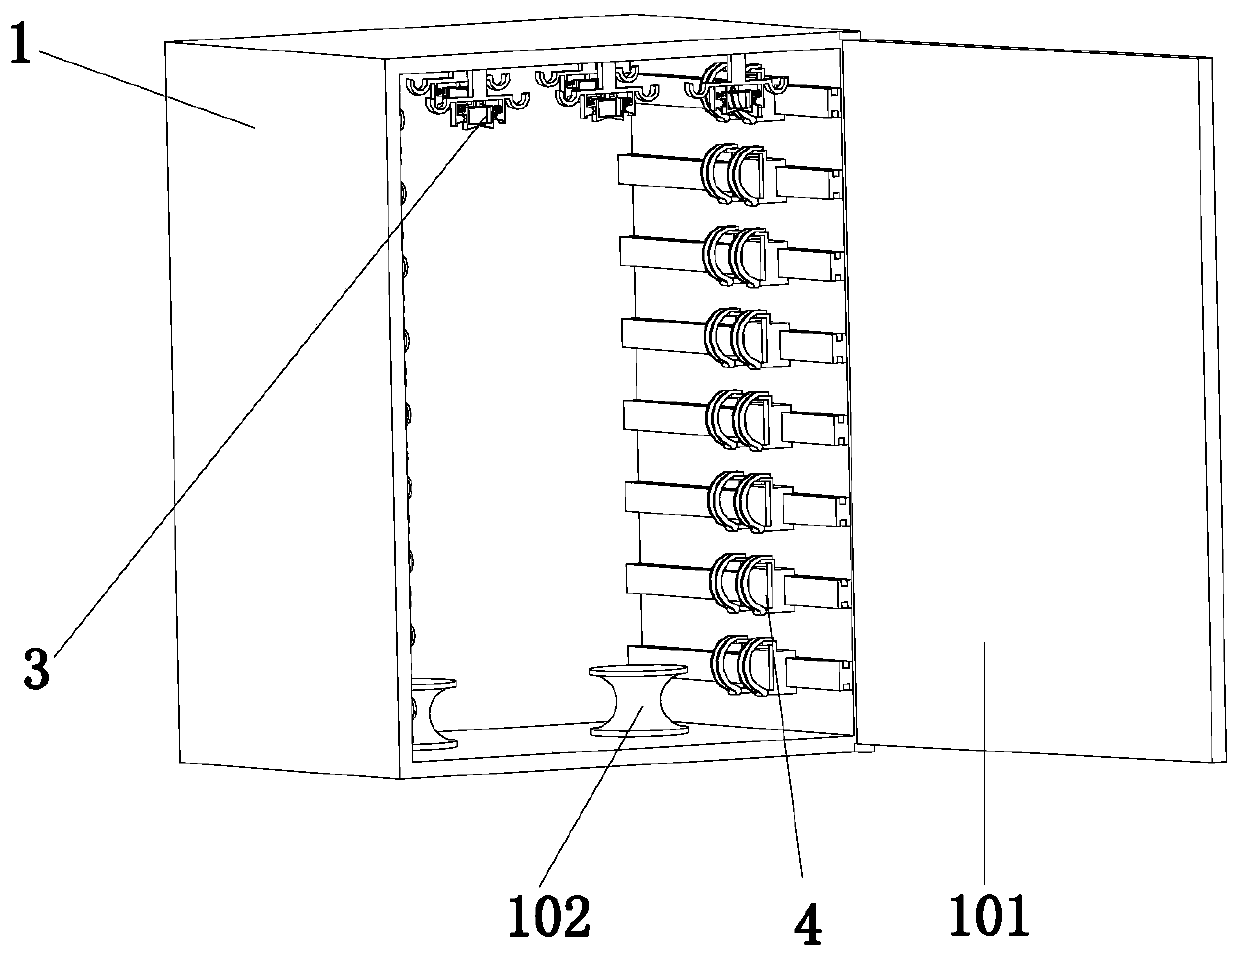 Power distribution cabinet with cable arrangement function